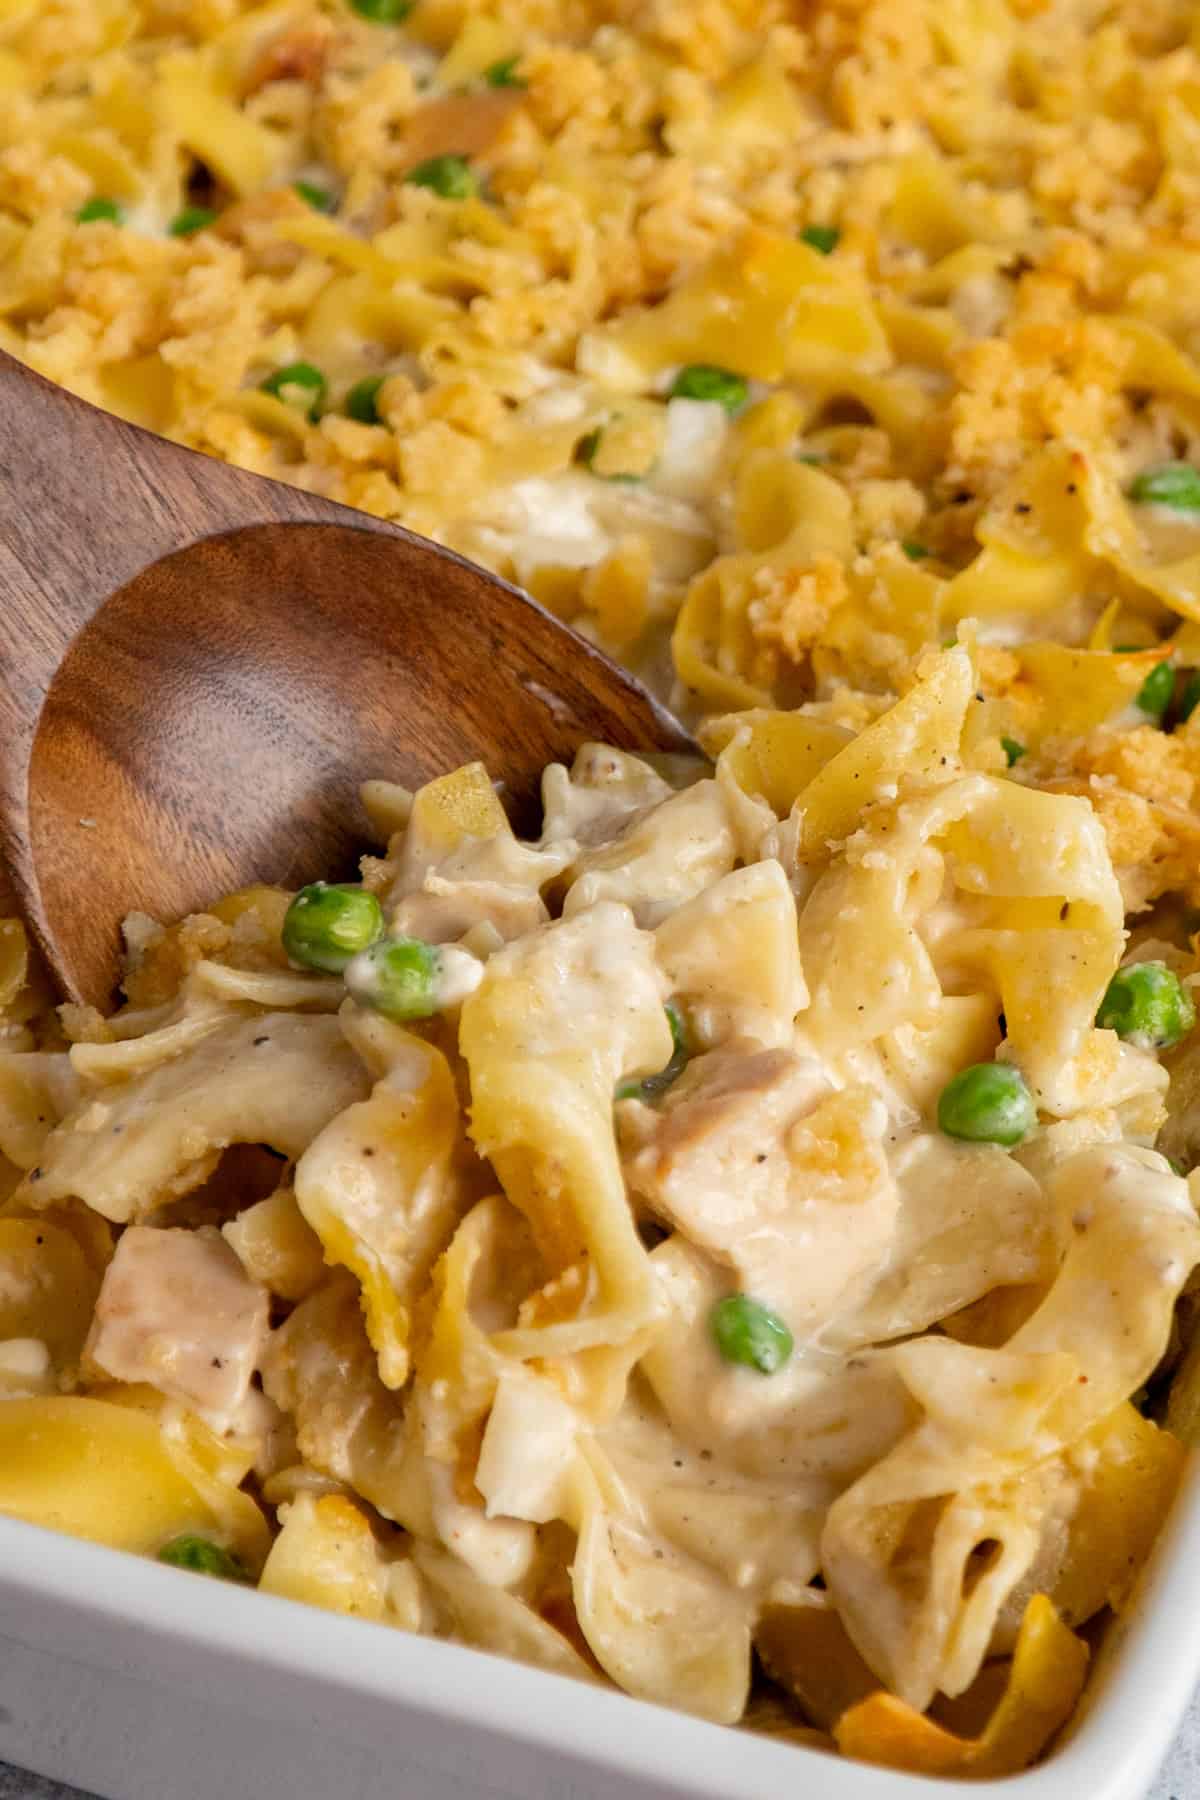 Serving chicken noodle casserole from a white baking dish with a wooden spoon.